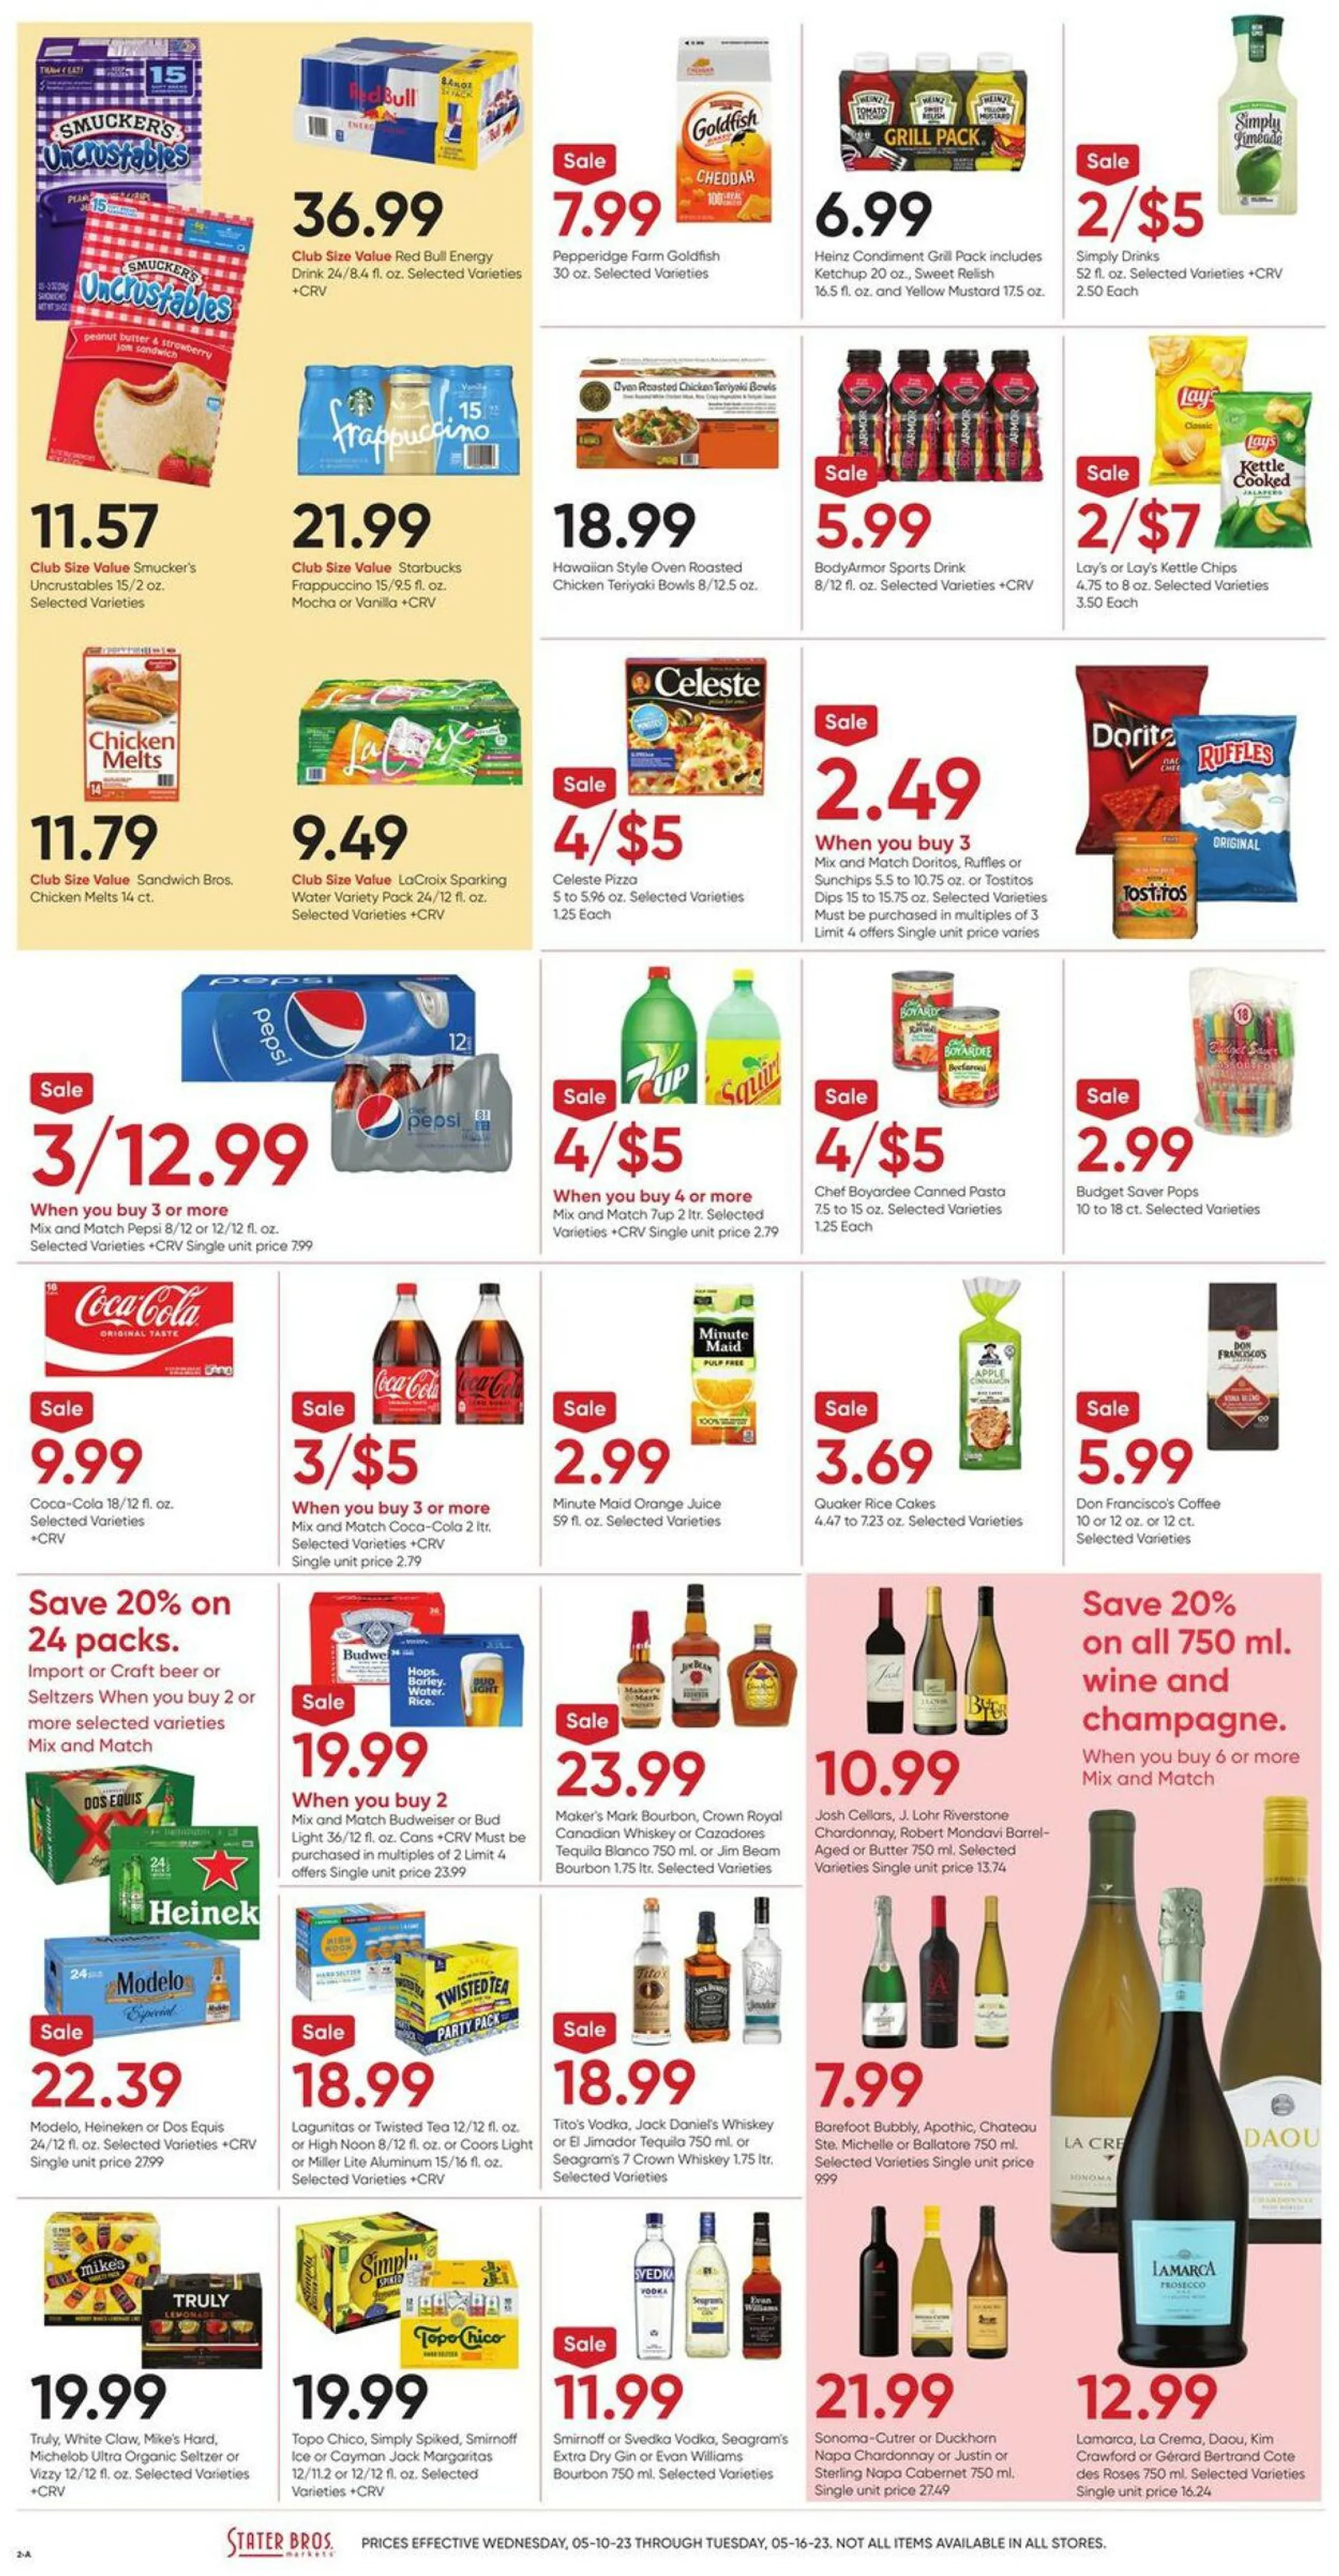 Stater Bros. Current weekly ad - 2